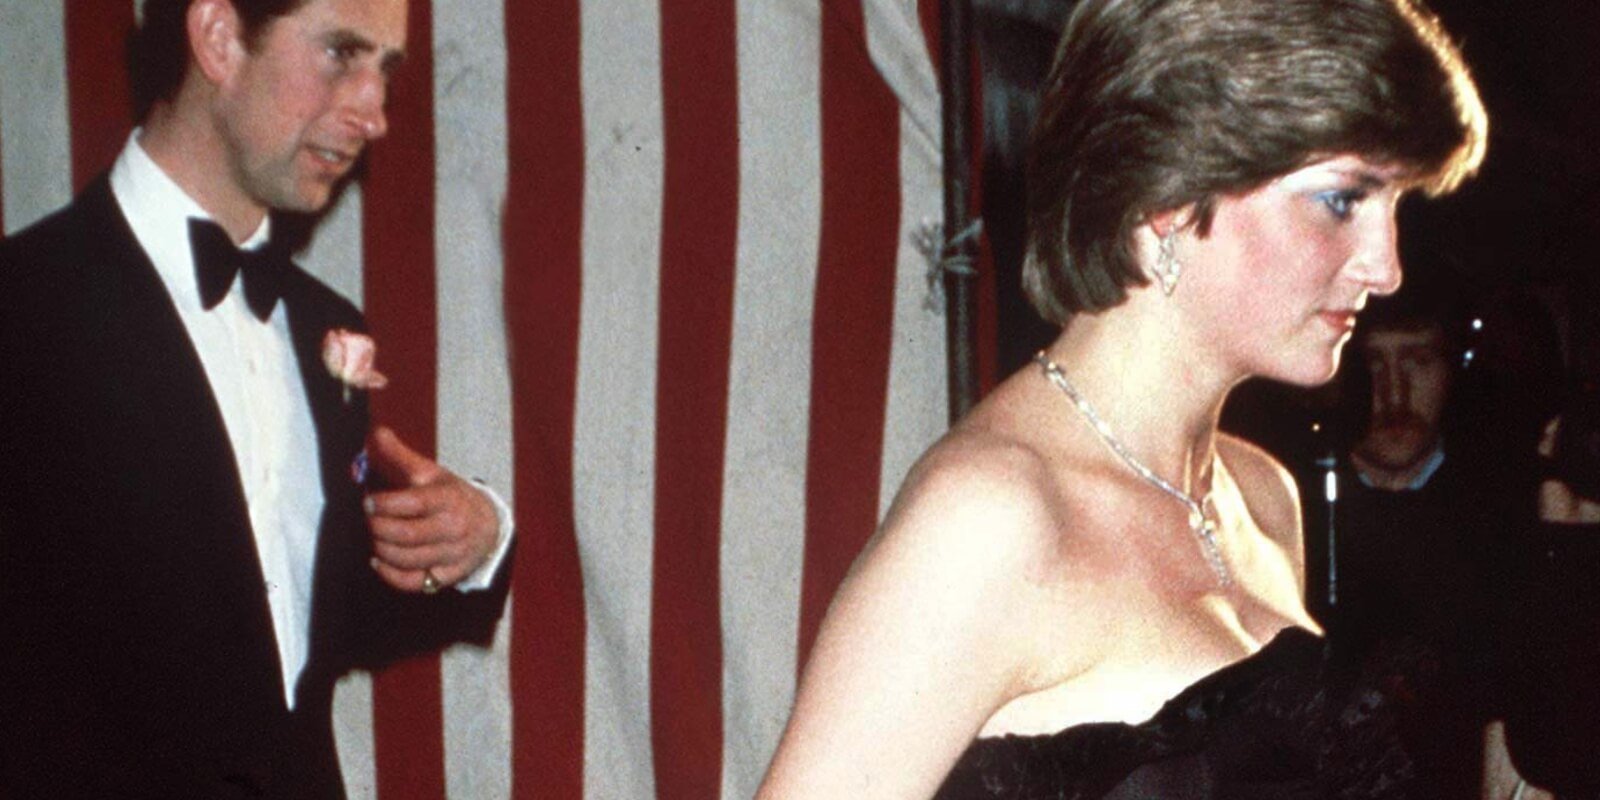 Prince Charles and Princess Diana photographed at her first royal event in 1981.